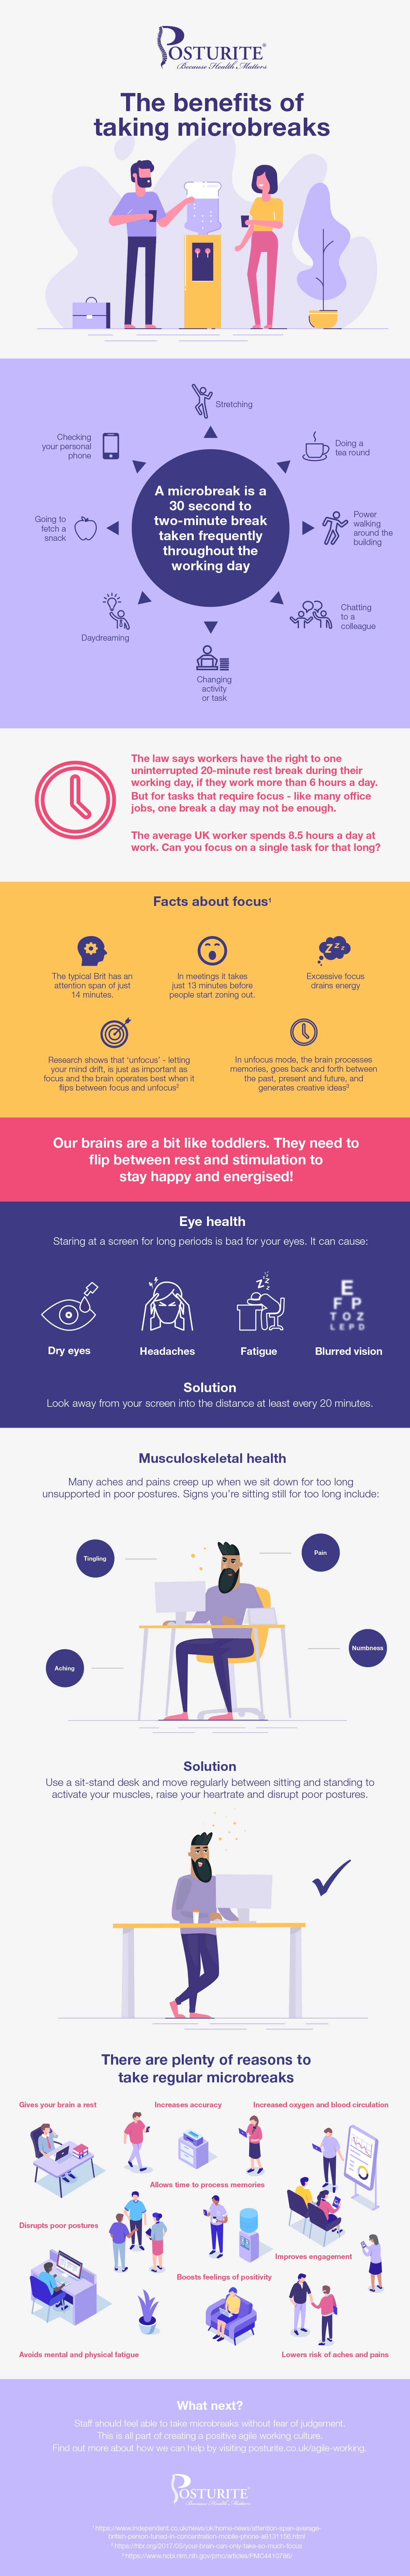 Infographic depicting the benefits of taking microbreaks in a series of illustrations